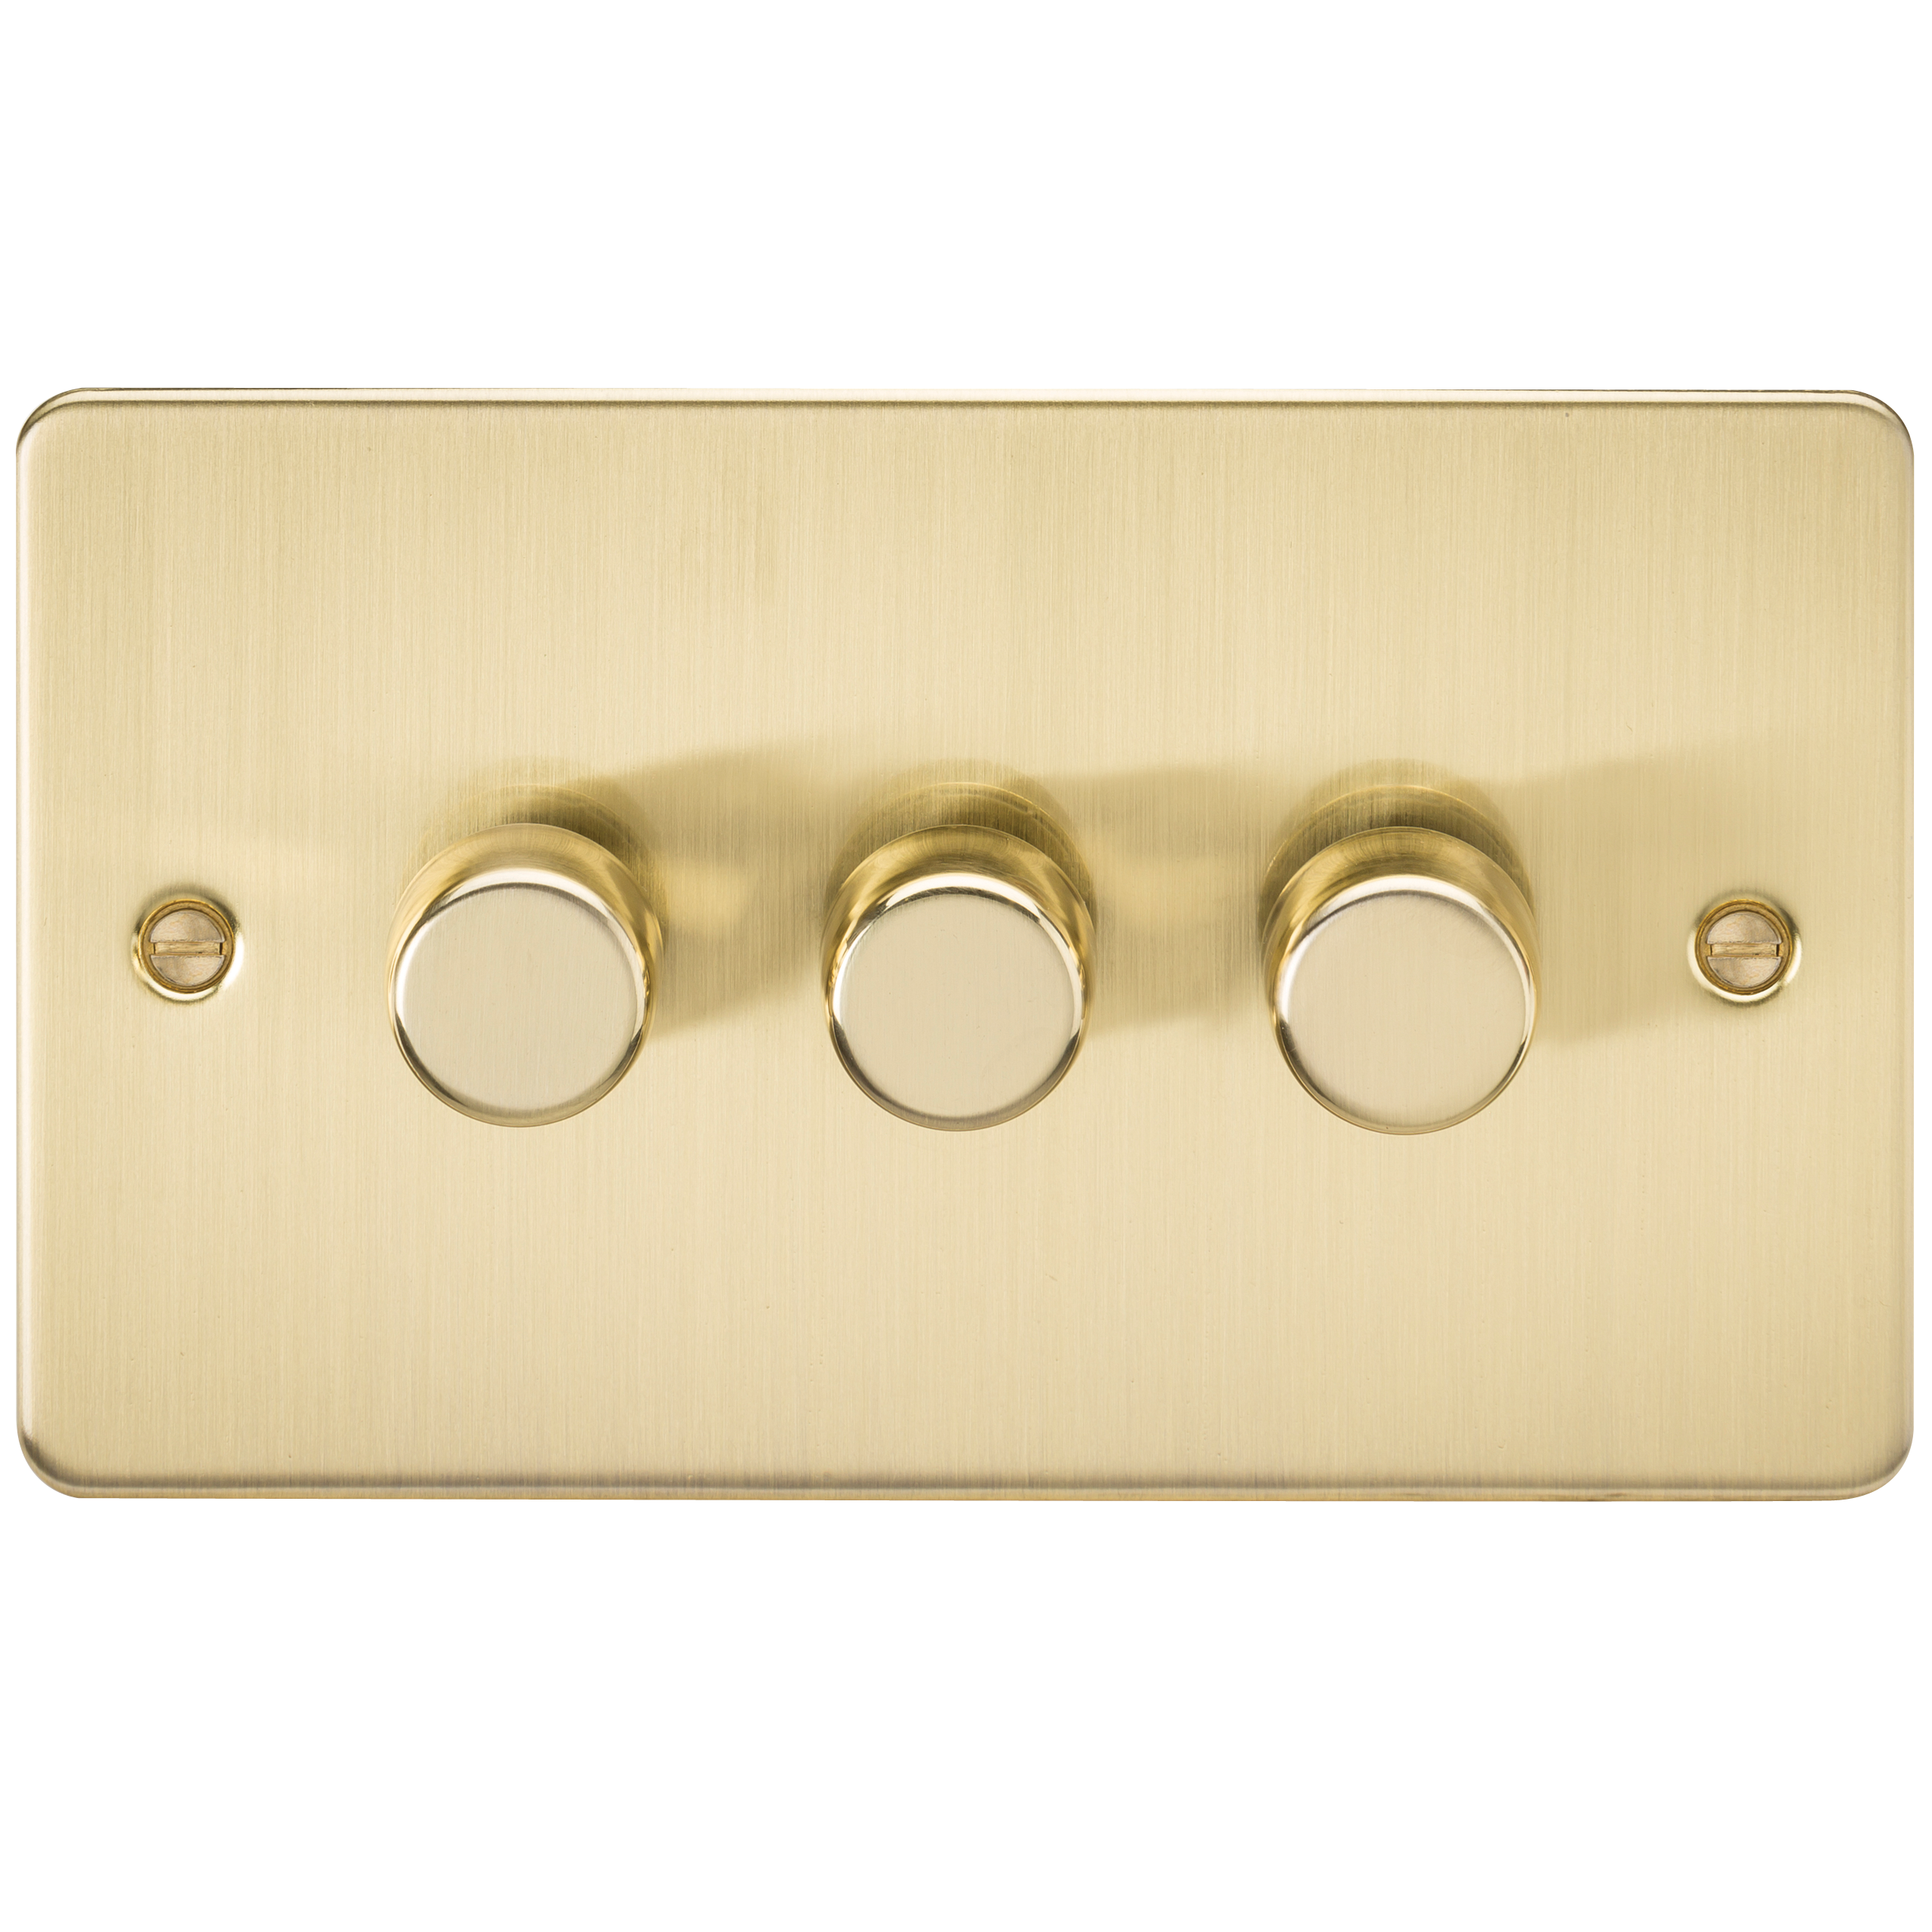 Flat Plate 3G 2 Way Dimmer 60-400W - Brushed Brass - FP2163BB 